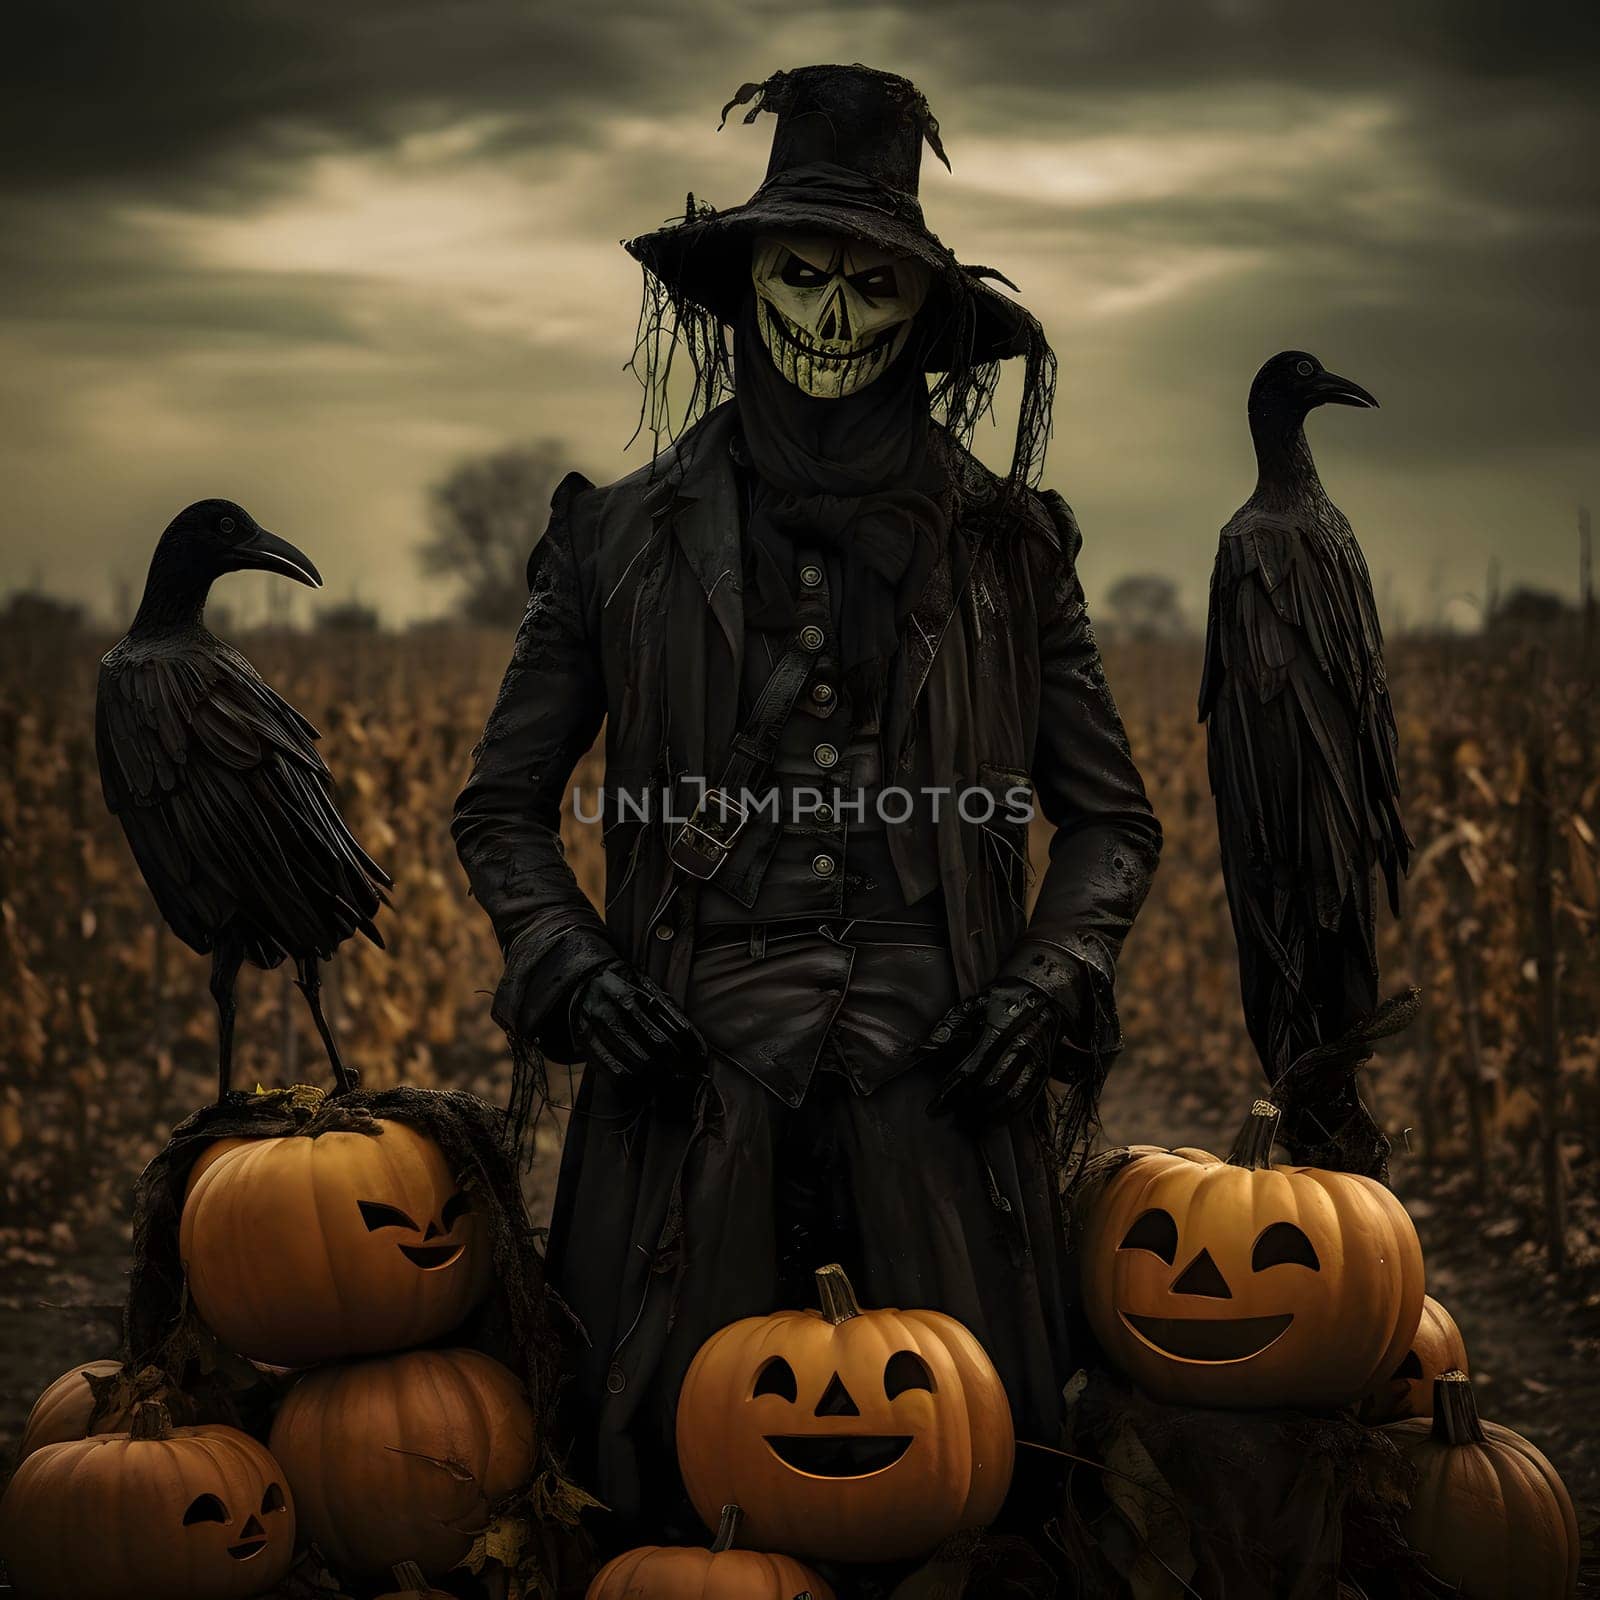 A dark scarecrow, two ravens and laughing jack-o-lantern pumpkins on a field, a Halloween image. Atmosphere of darkness and fear.